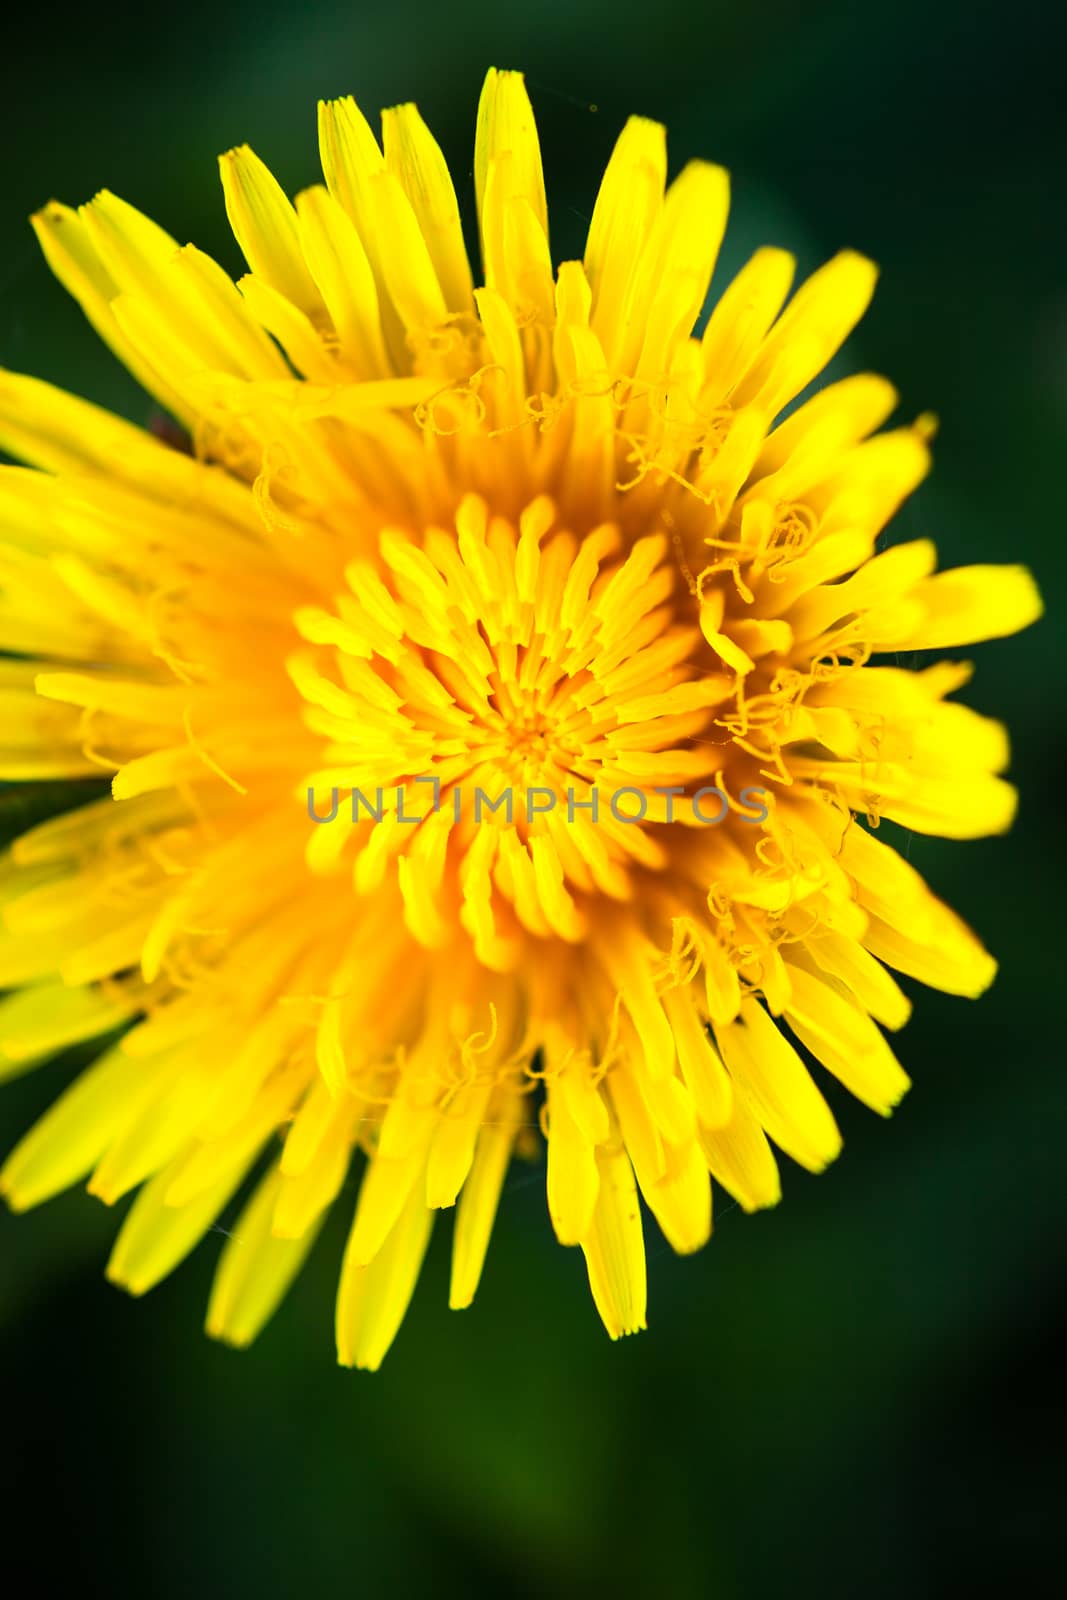 Closeup of the blooming yellow dandelion flower.